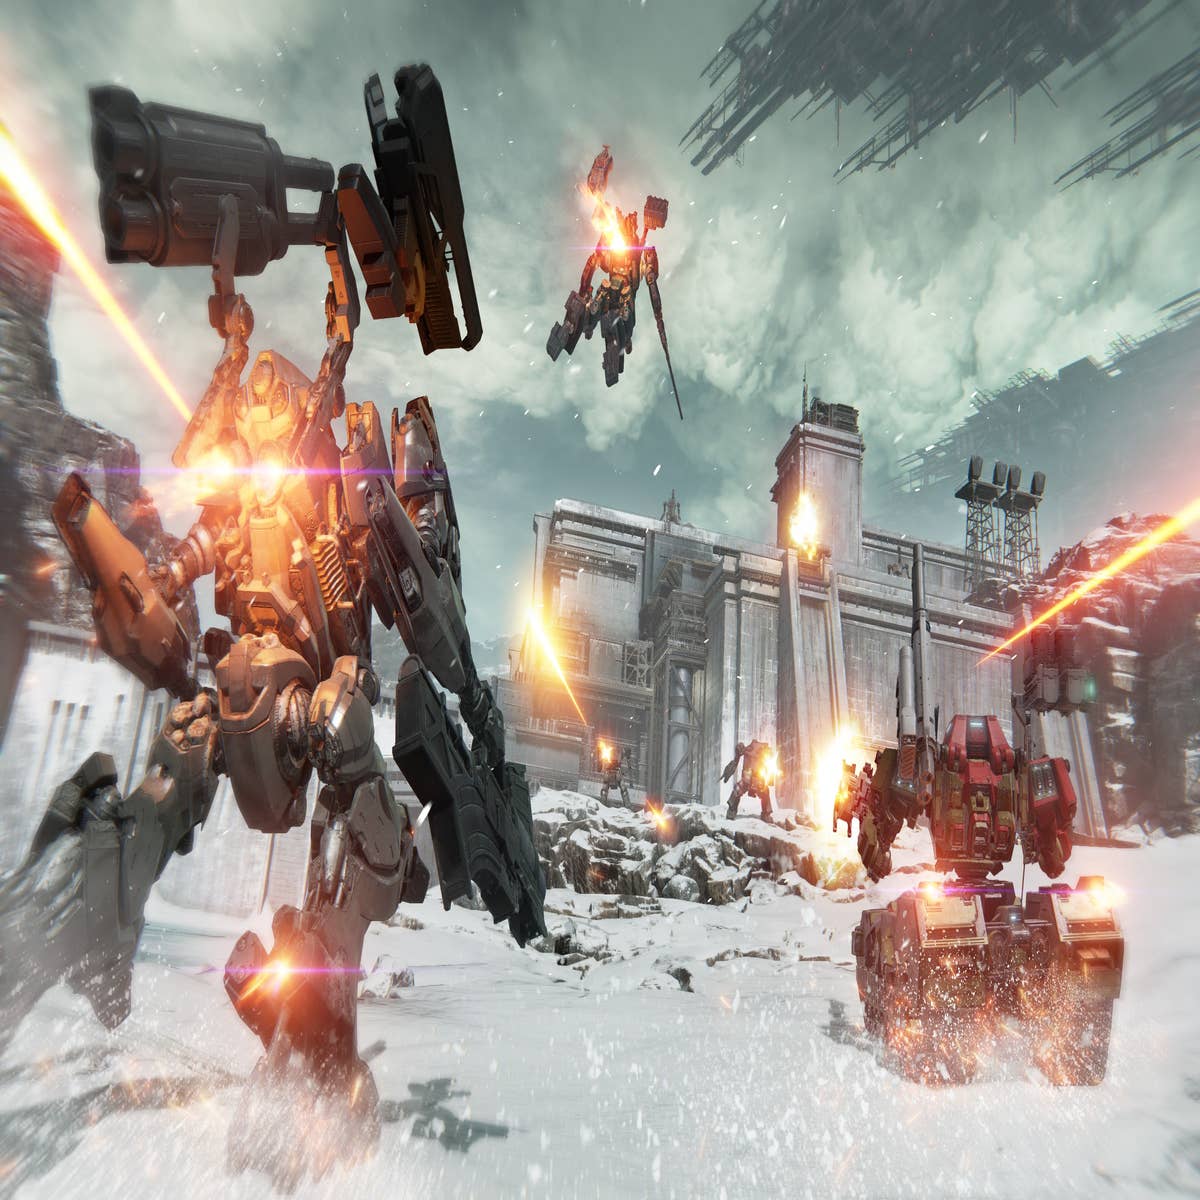 Armored Core 6 Is the Perfect Breather Between Gigantic New